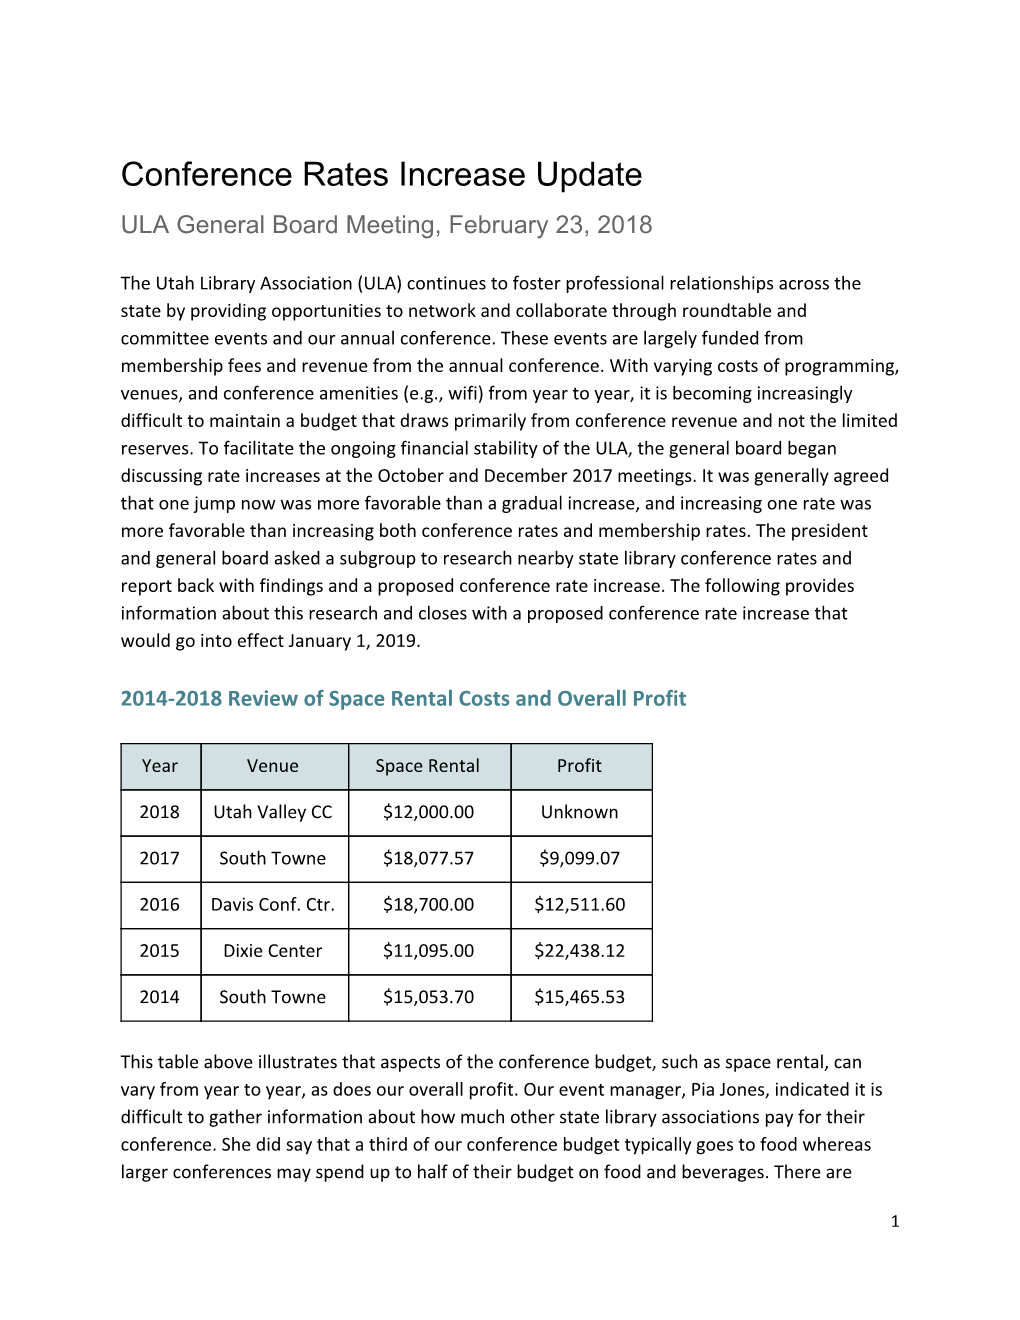 Conference Rates Increase Update ULA General Board Meeting, February 23, 2018